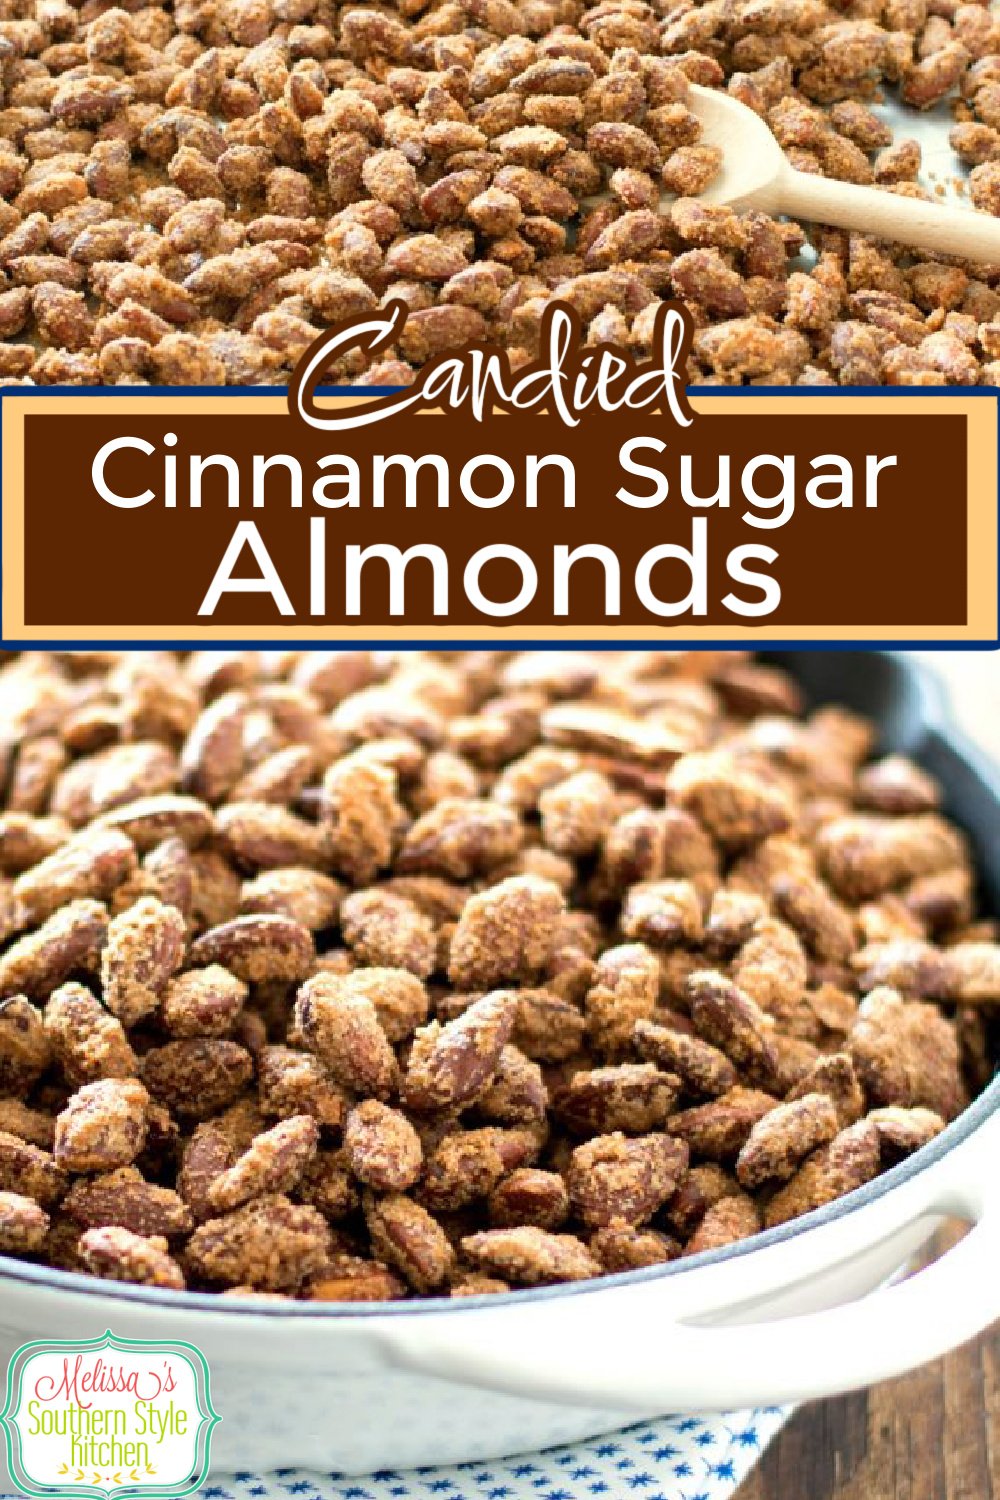 A balanced diet is a few of these crazy delicious Roasted Cinnamon Sugar Almonds in each hand #roastedalmonds #cinnamonsugaralmonds #candiedalmonds #holidayrecipes #Christmasrecipes #desserts #dessertfoodrecipes #southernrecipes #southernfood via @melissasssk